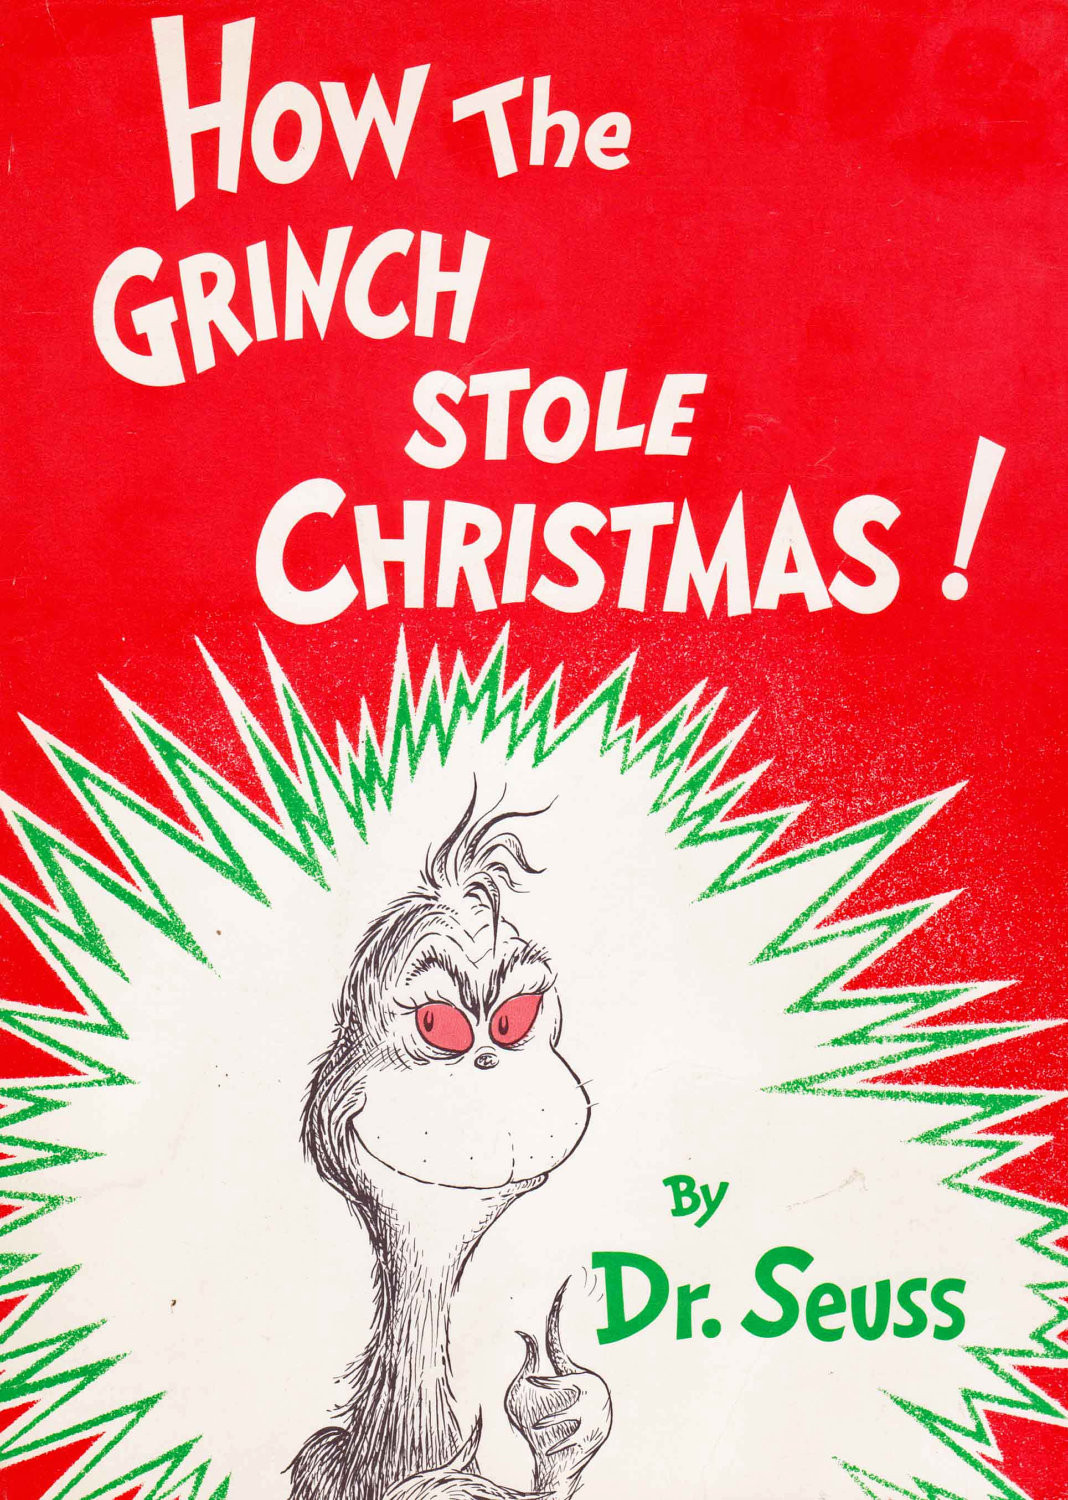 How The Grinch Stole Christmas Book Quotes
 How The Grinch Stole Christmas Book Quotes QuotesGram